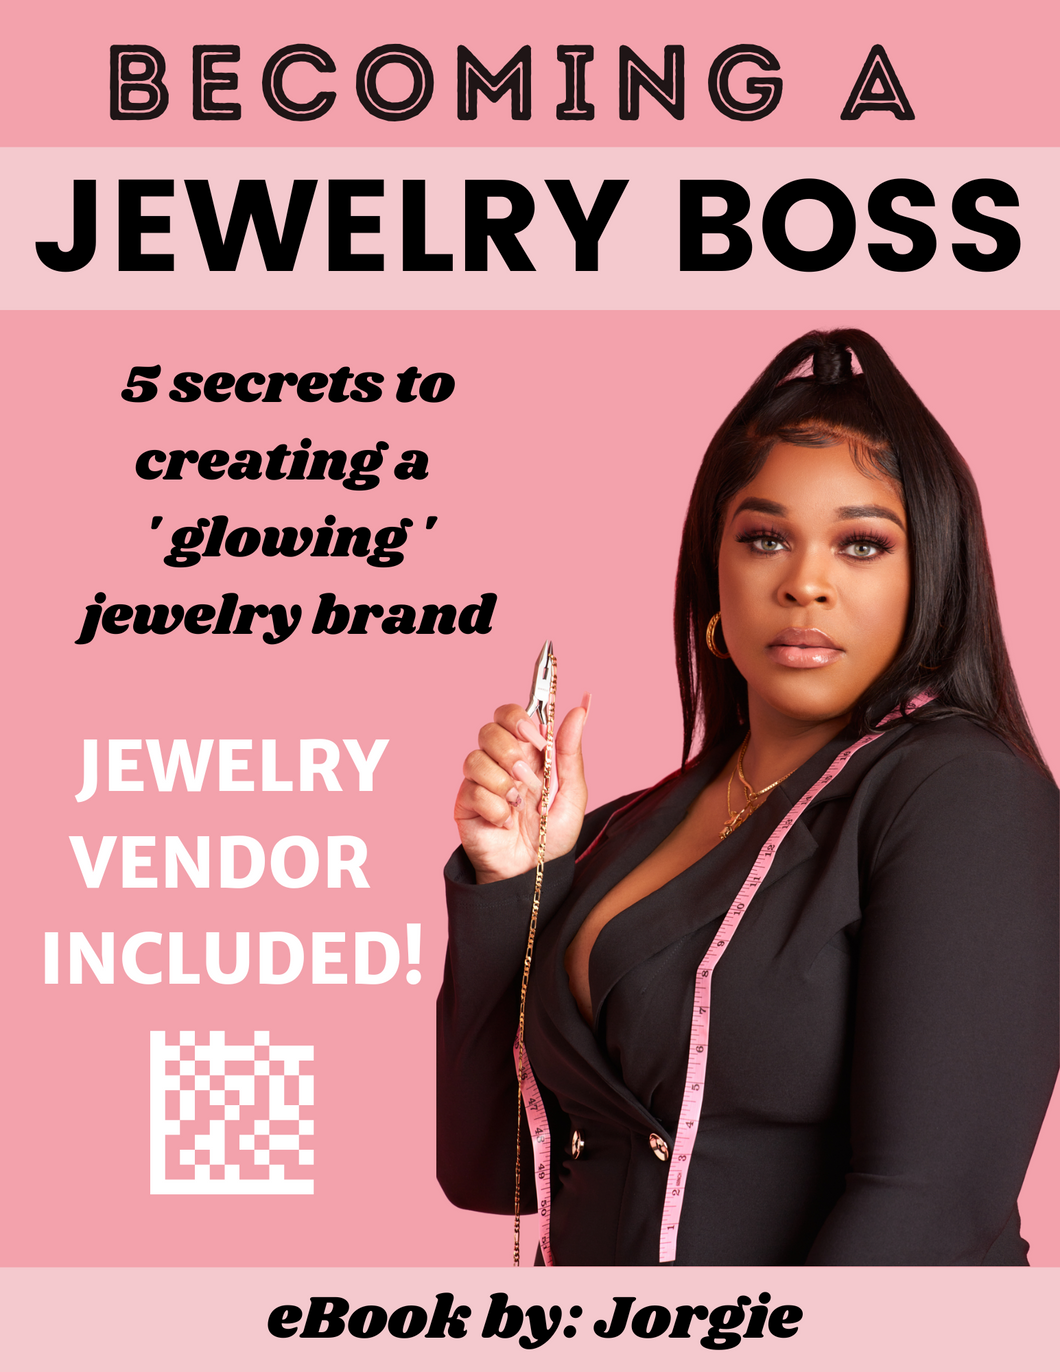 Becoming a Jewelry Boss